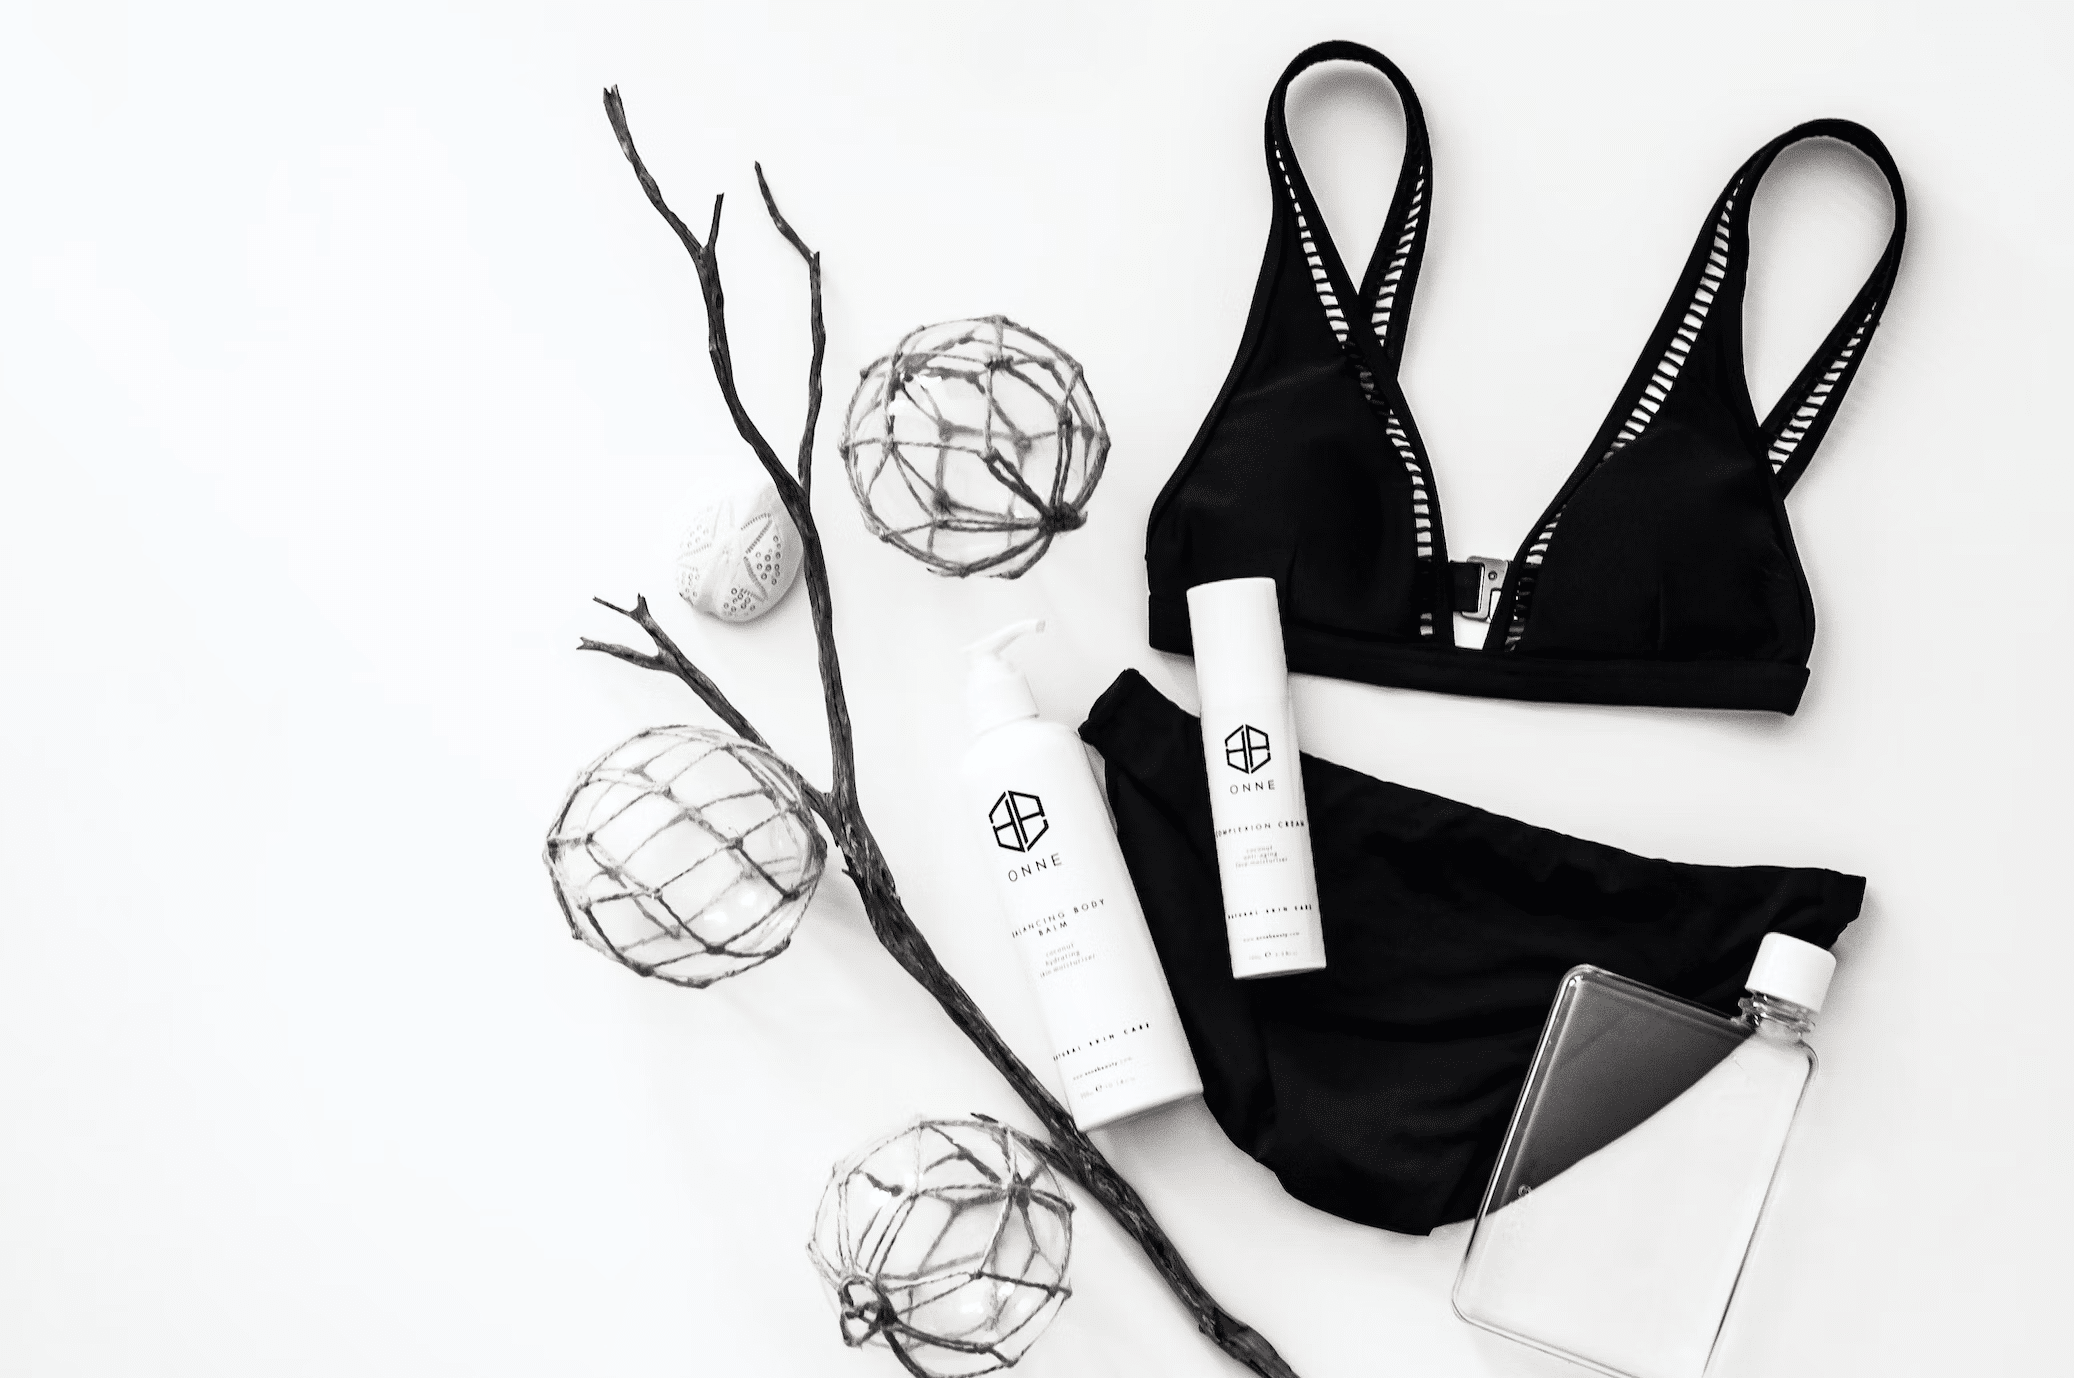 Crossover Bra – Eco-Friendly and Ethical Clothing, Made in Canada